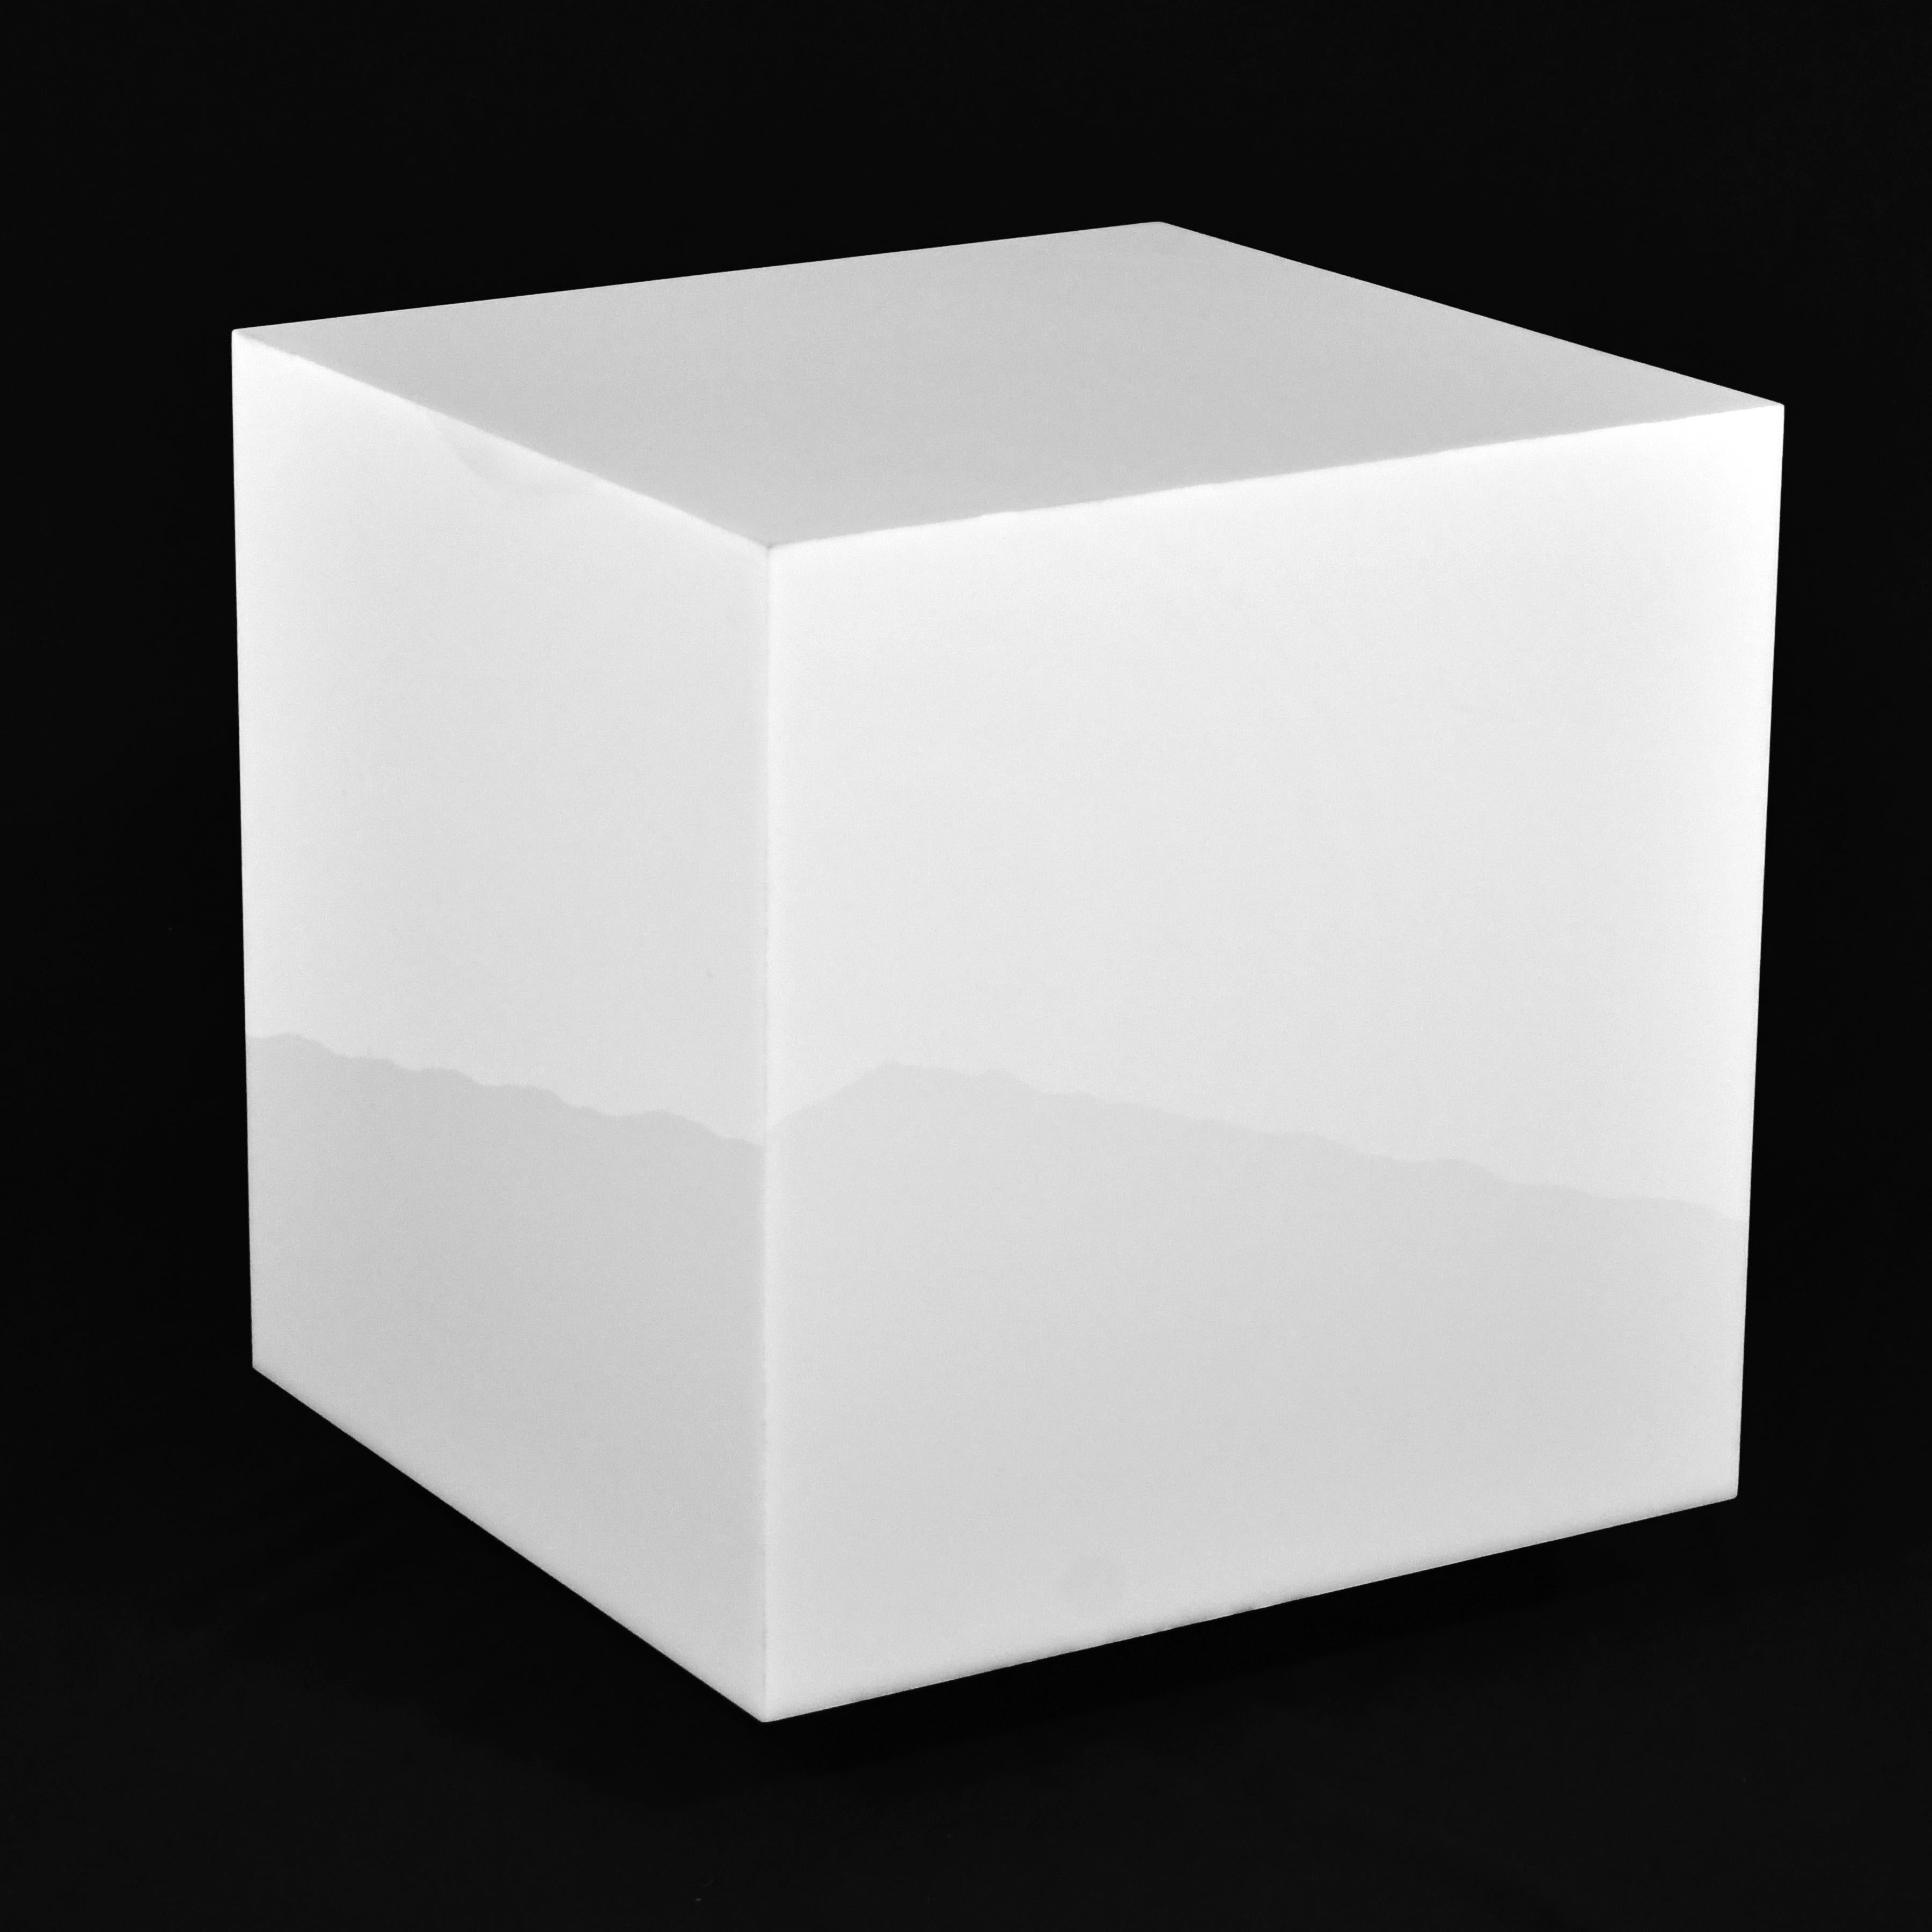 Late 20th Century Pair of White Lucite Cube Tables/ Pedestals